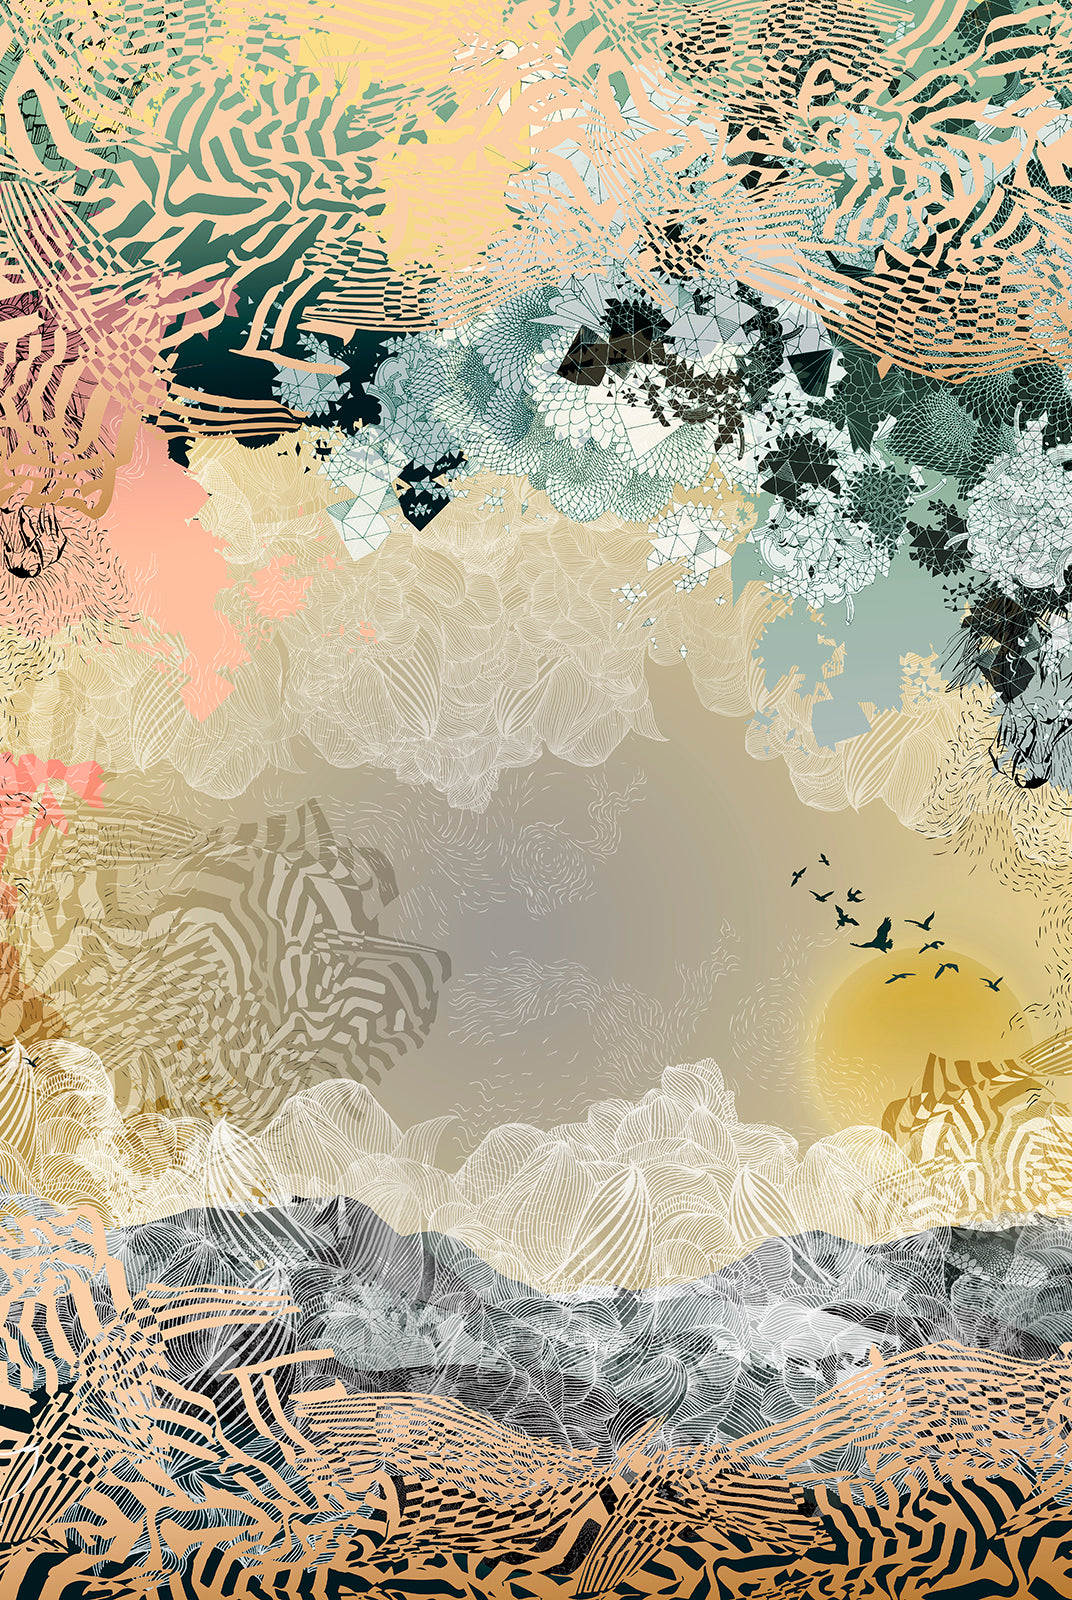 Full size print of a sunrise design in muted yellows, greens and coral